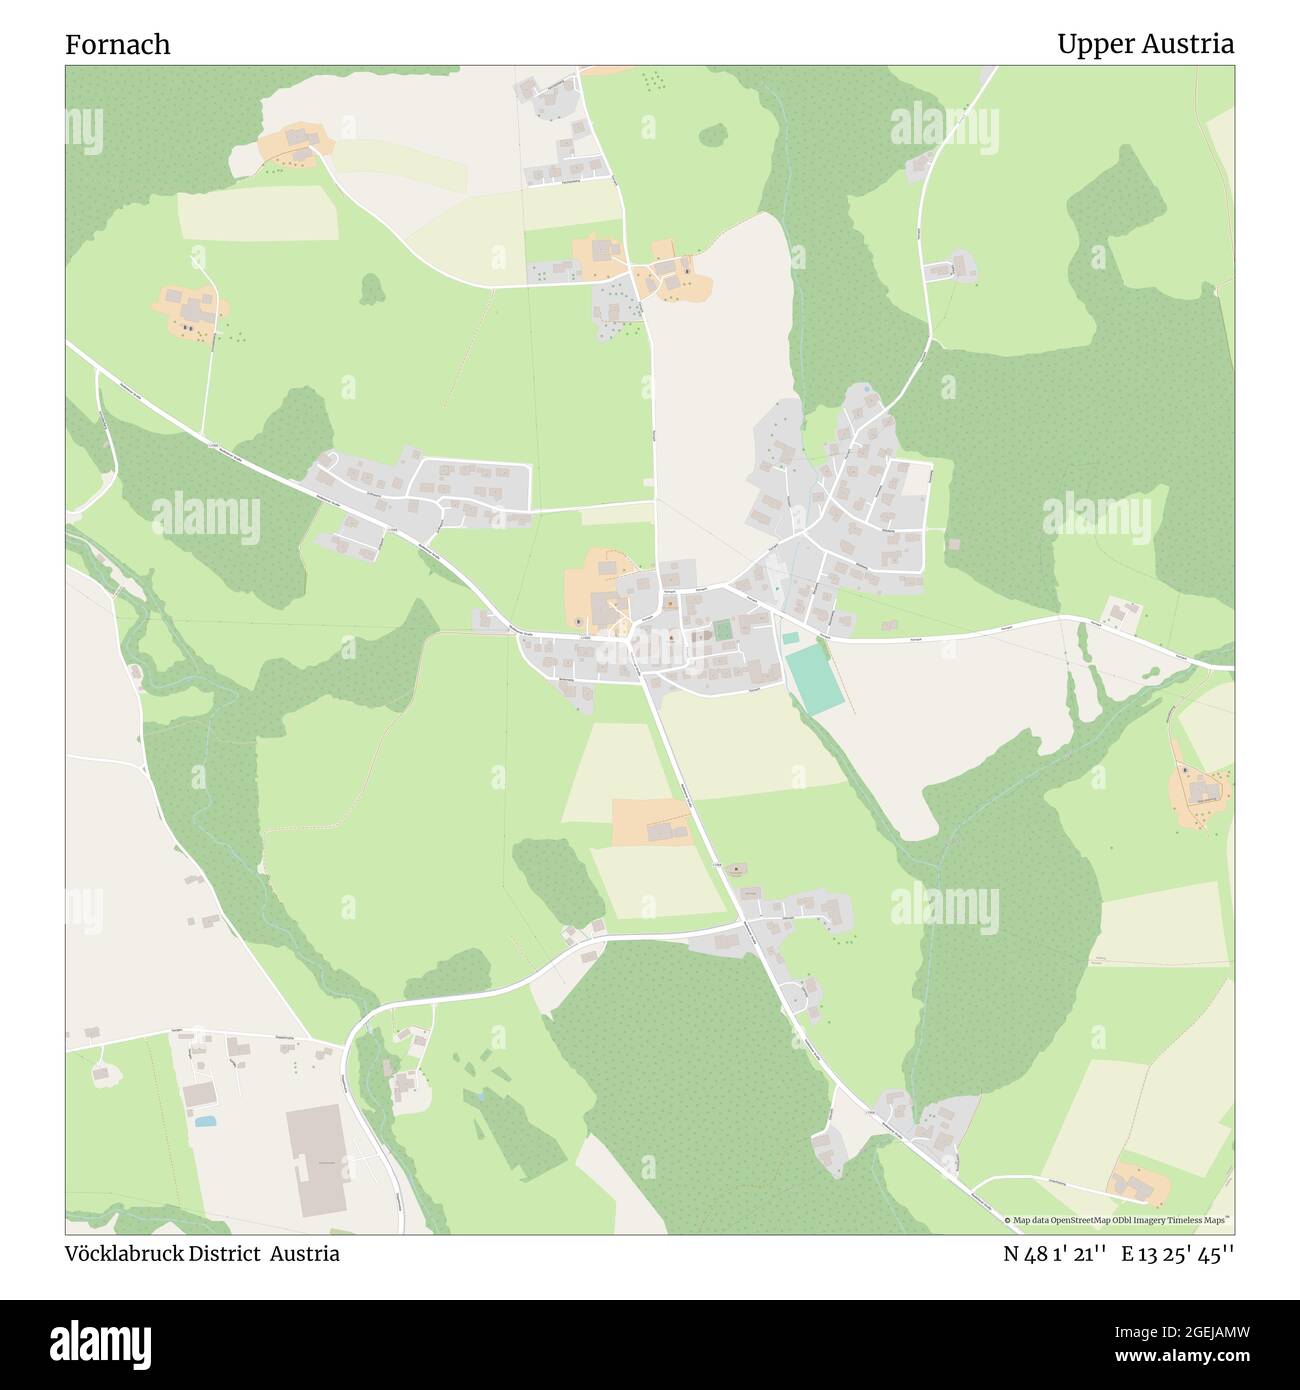 Fornach, Vöcklabruck District, Austria, Upper Austria, N 48 1' 21'', E 13 25' 45'', map, Timeless Map published in 2021. Travelers, explorers and adventurers like Florence Nightingale, David Livingstone, Ernest Shackleton, Lewis and Clark and Sherlock Holmes relied on maps to plan travels to the world's most remote corners, Timeless Maps is mapping most locations on the globe, showing the achievement of great dreams Stock Photo